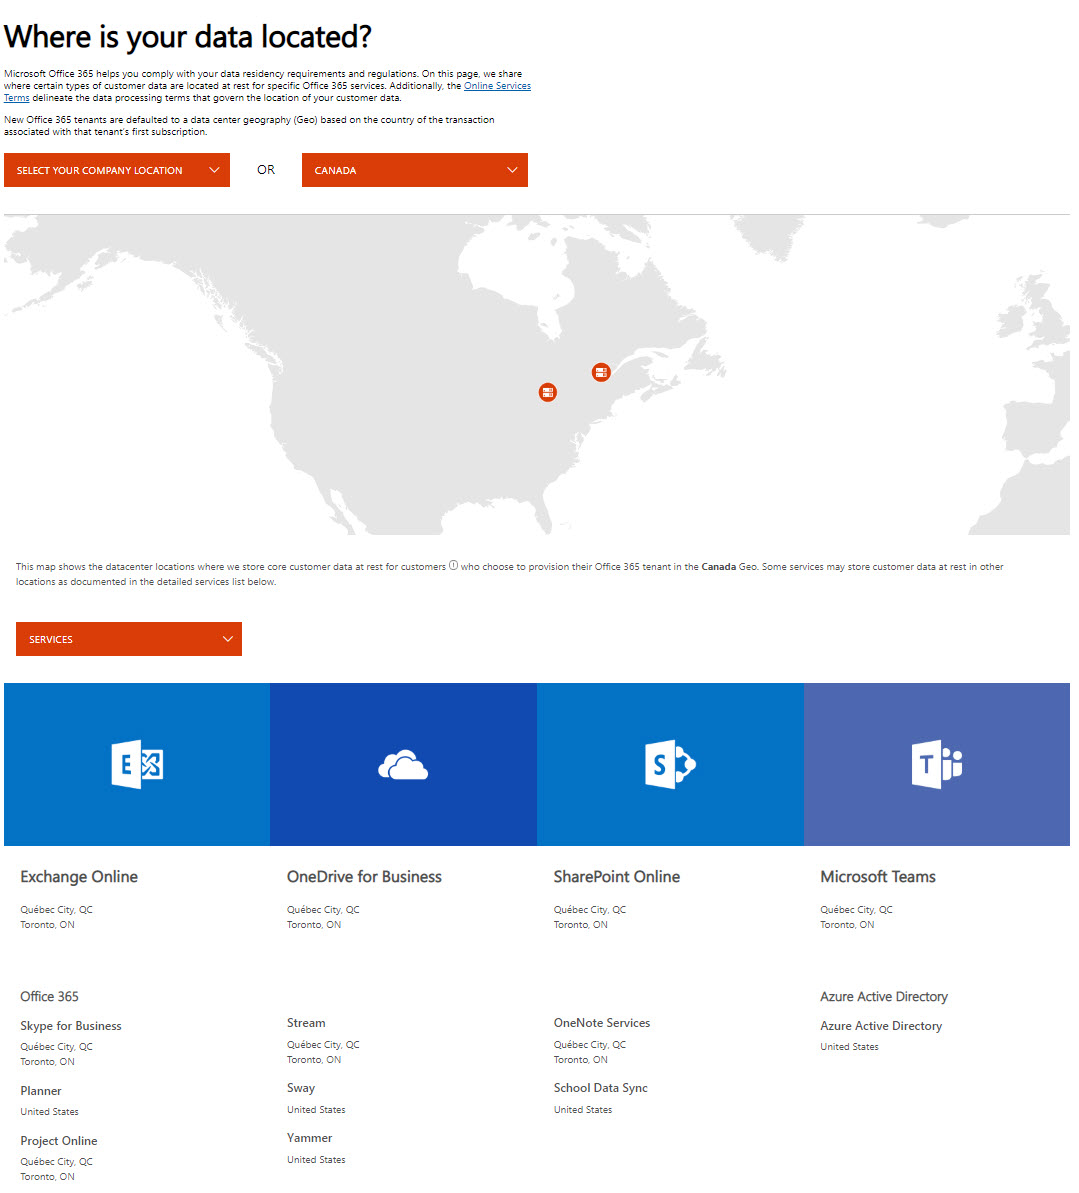 Office 365 services for Canada